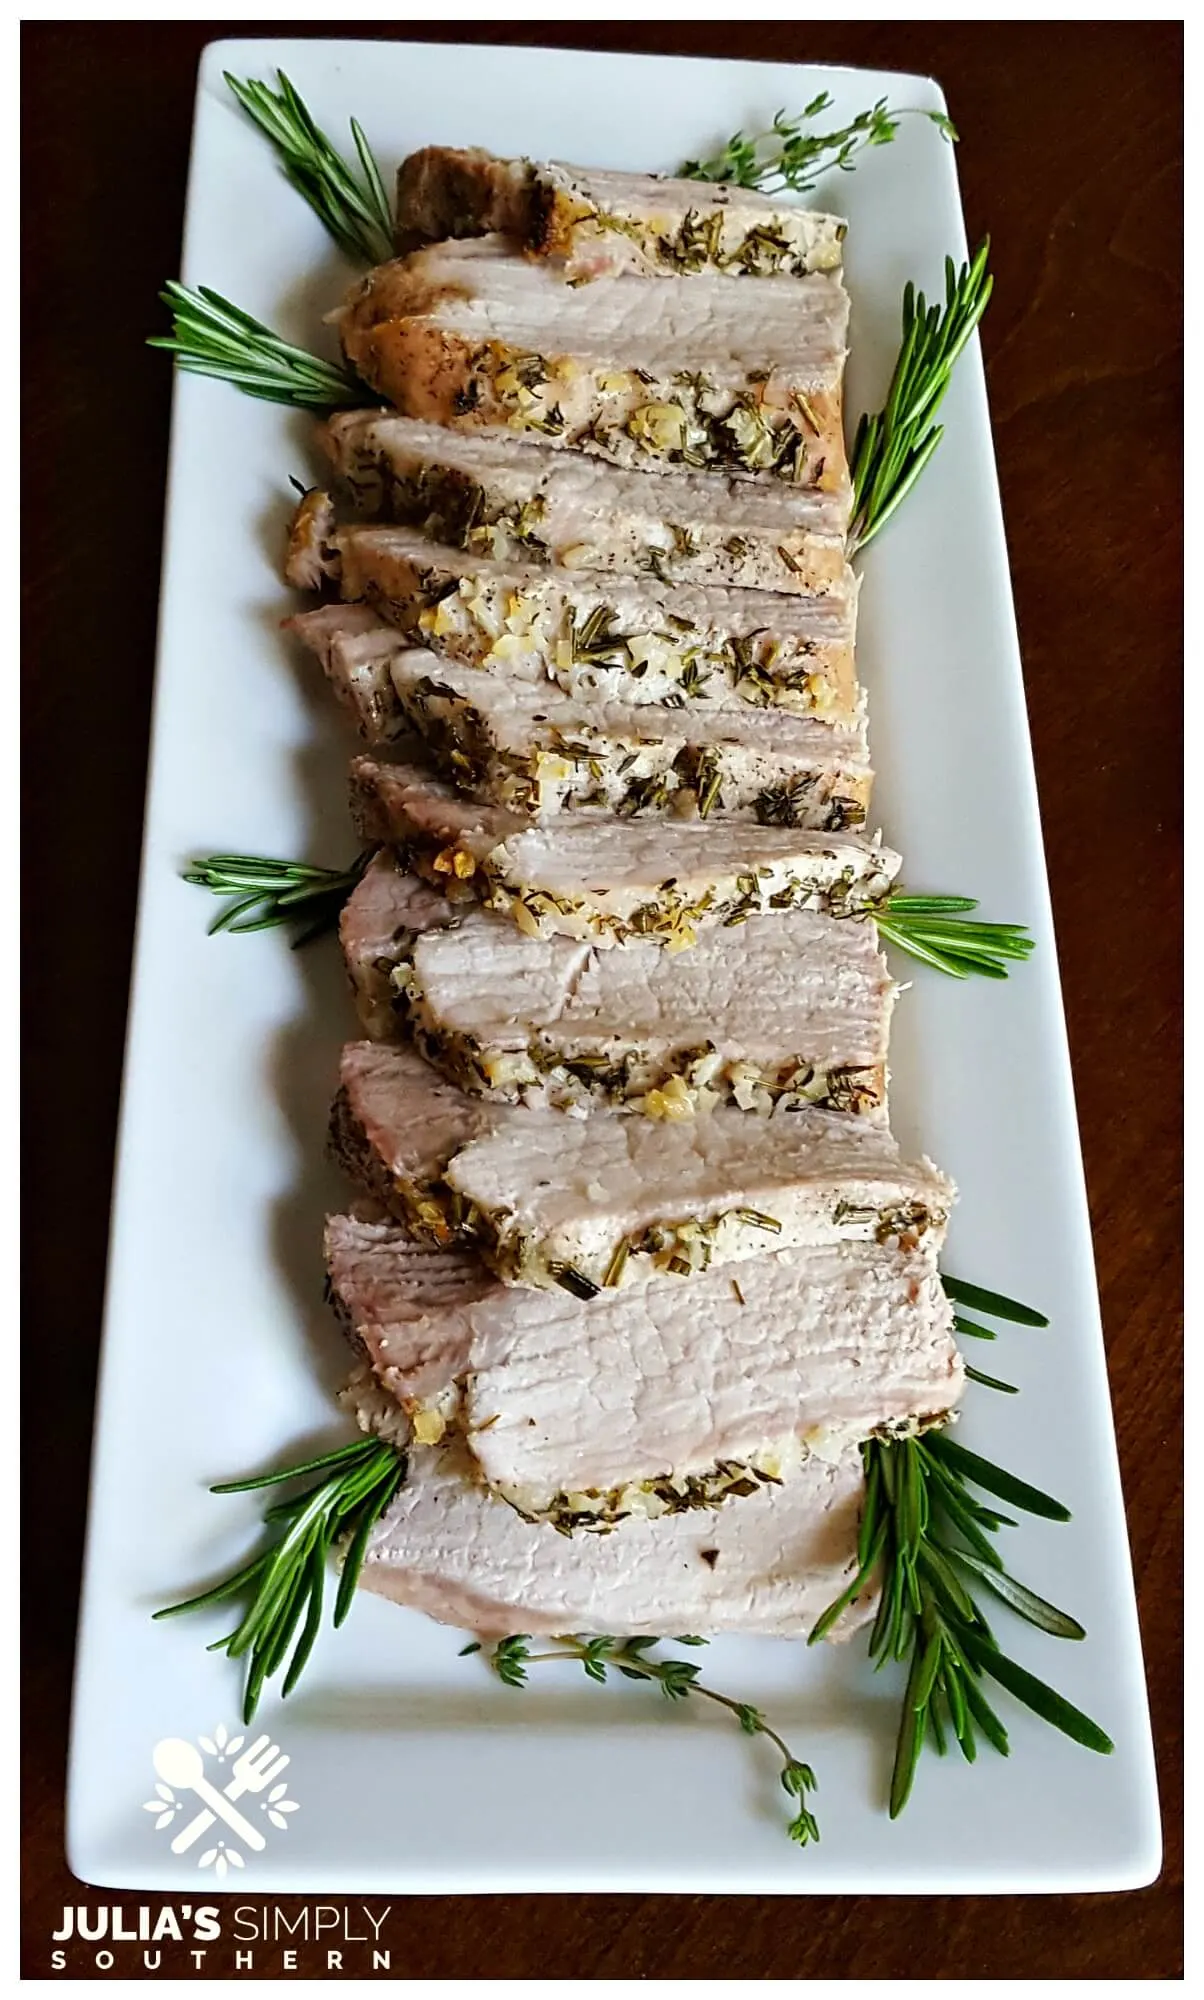 White platter with sliced pork loin roast crusted with herbs and garlic